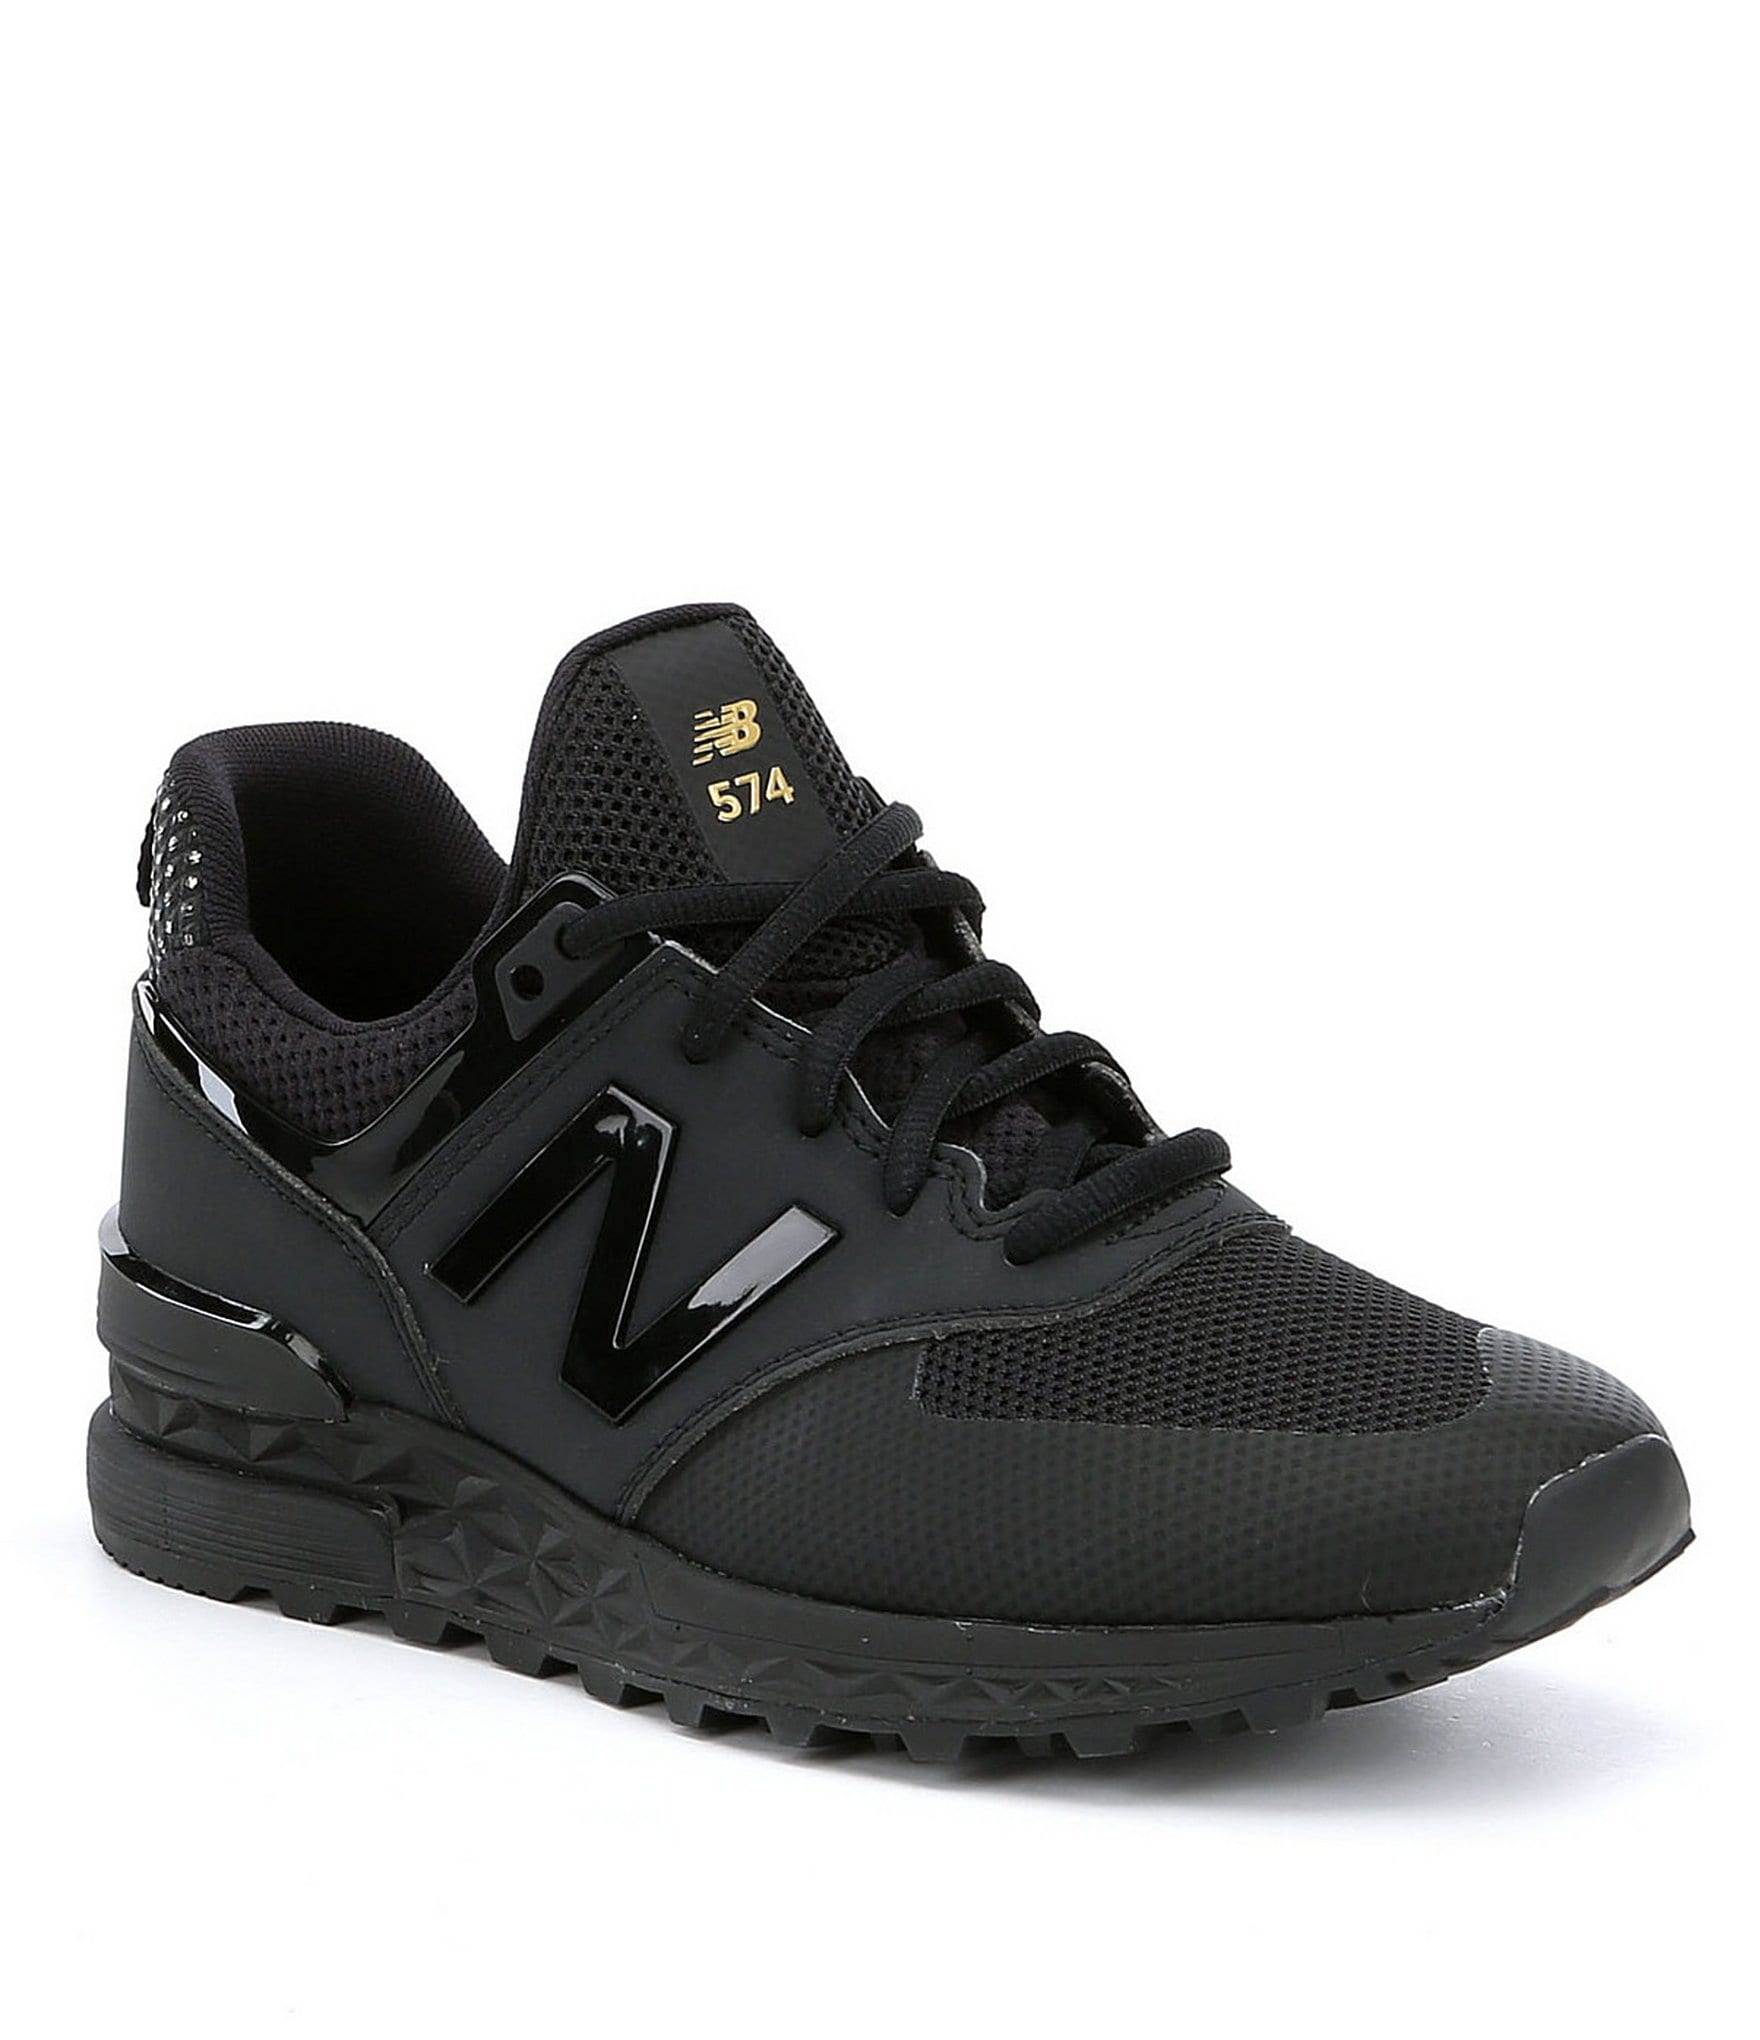 cheap new balance runners - 53% remise 